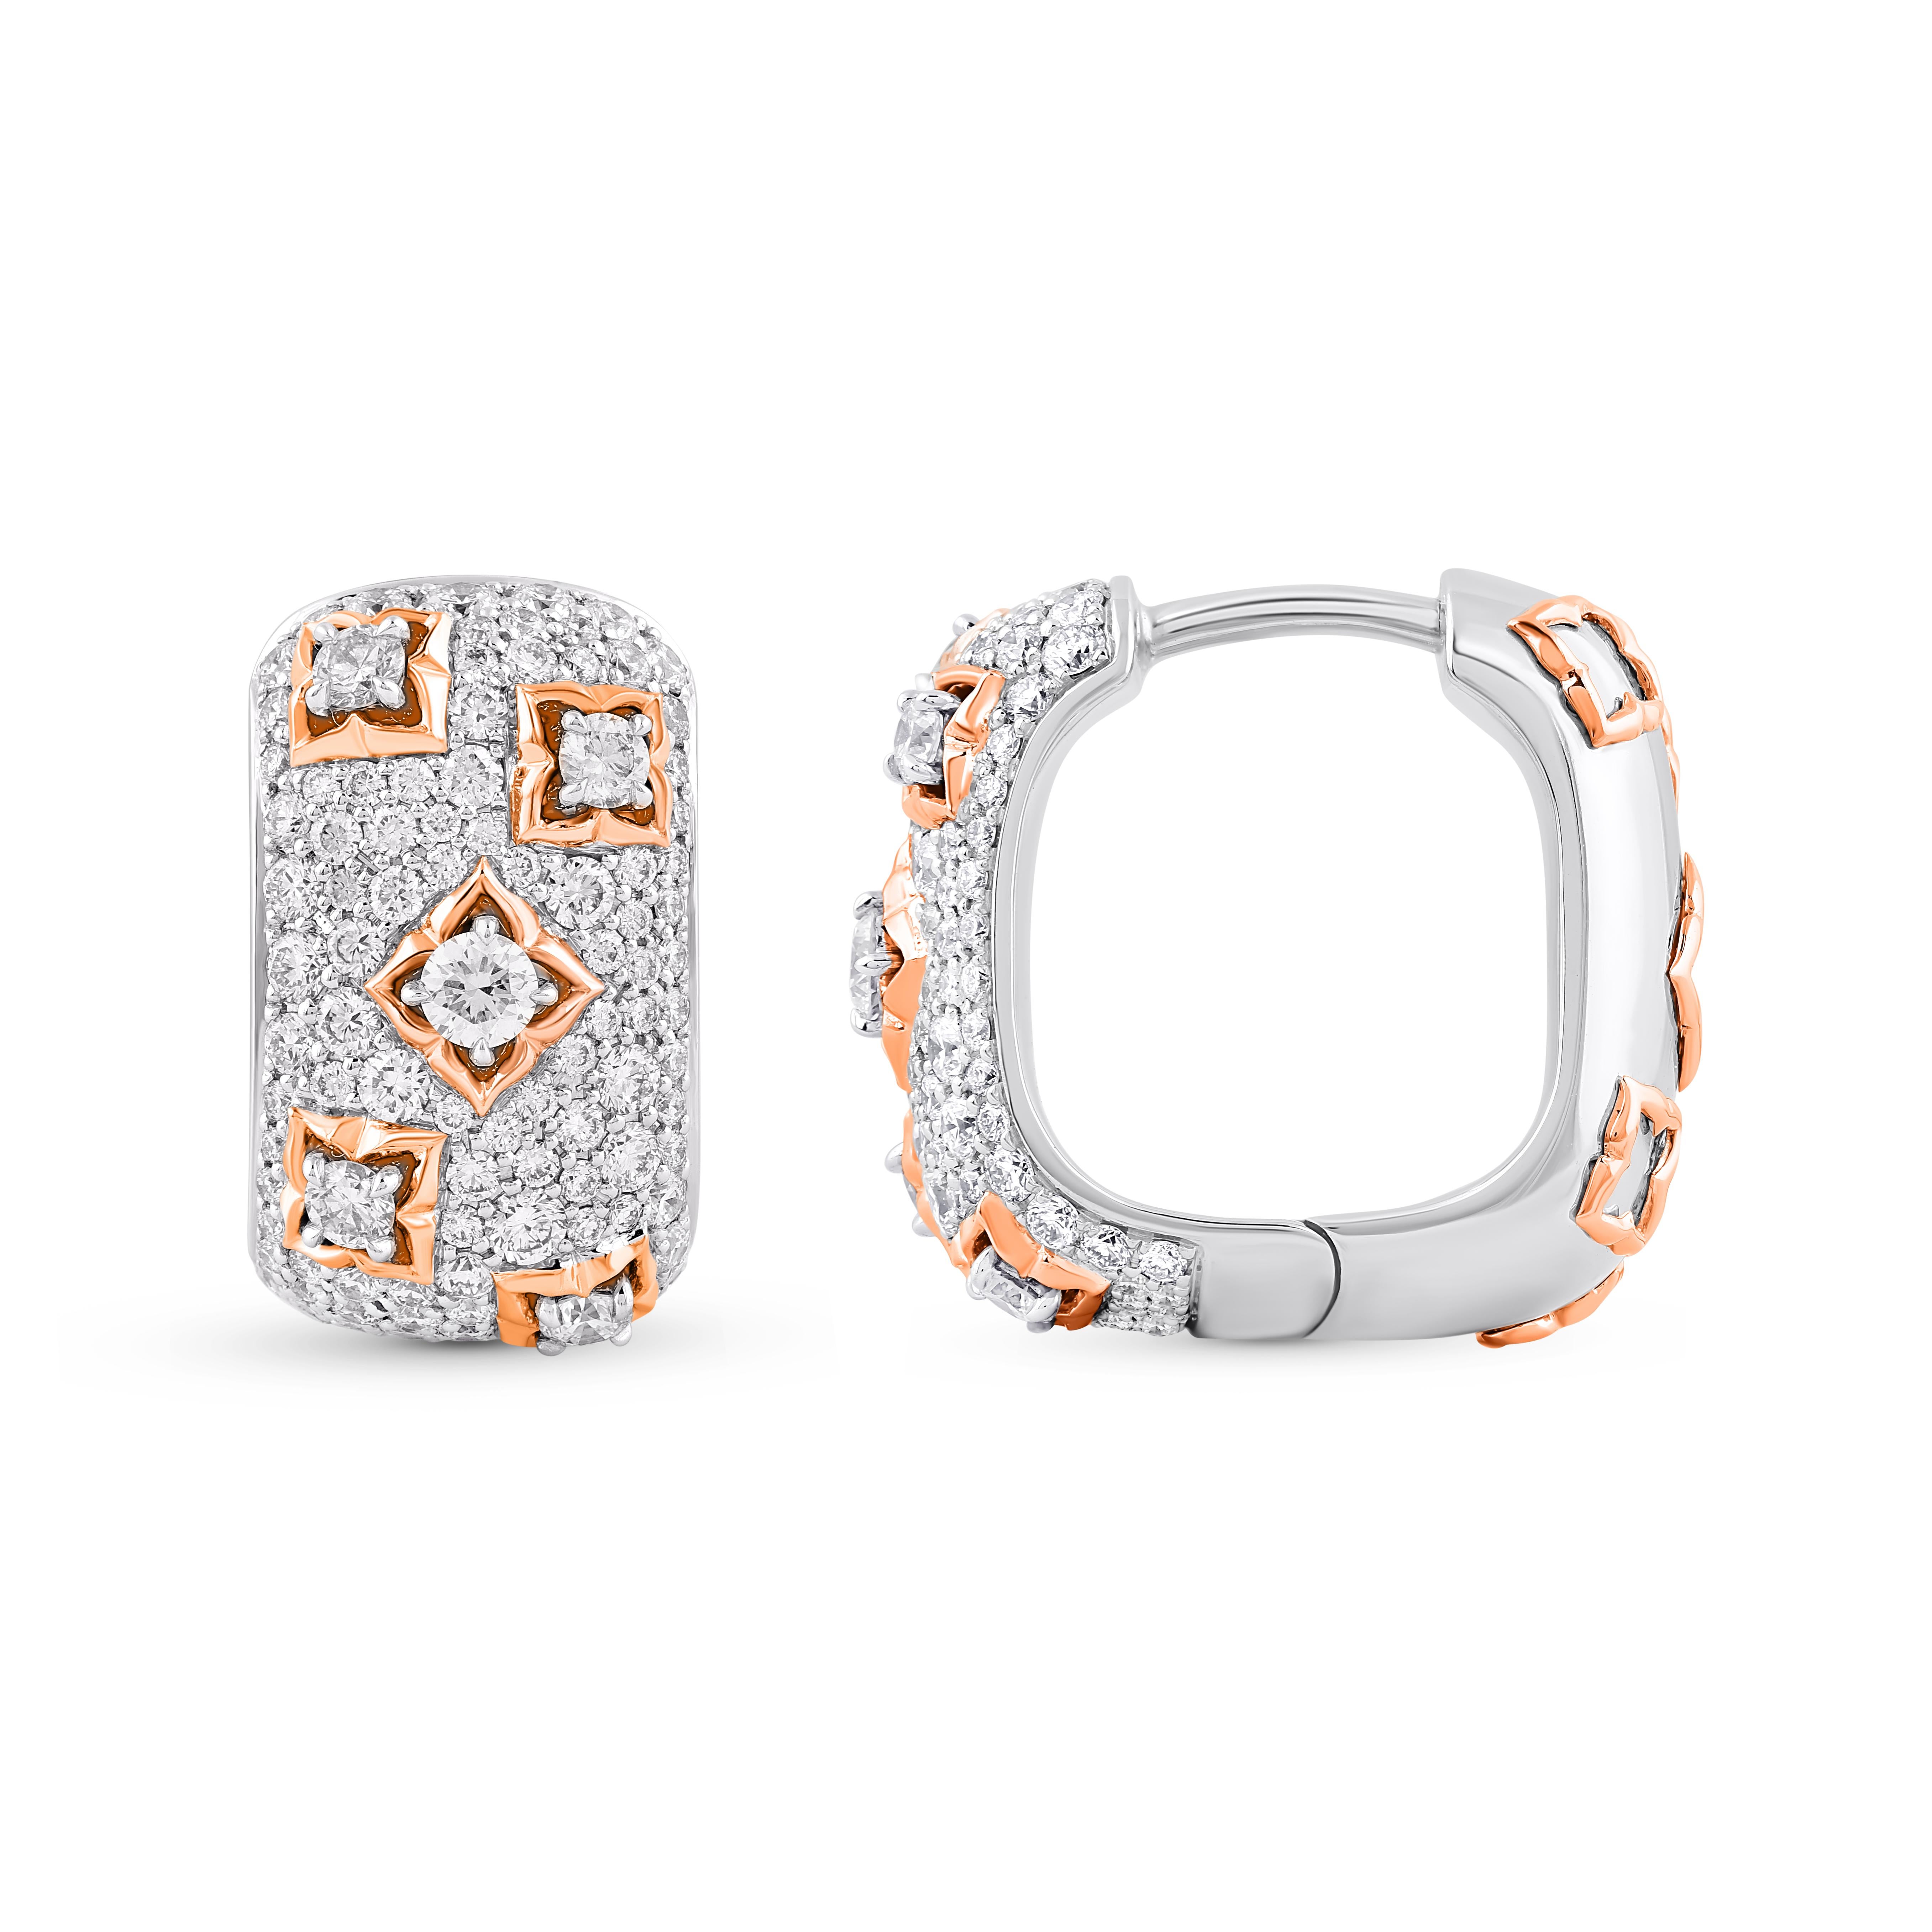 Inspired by the sacred symbols to invoke divinity, these elegantly designed hoop earrings are studded with 216 brilliant round-cut natural  diamonds in prong setting, beautifully crafted in 18 KT White and Yellow gold. Our diamonds are graded as F